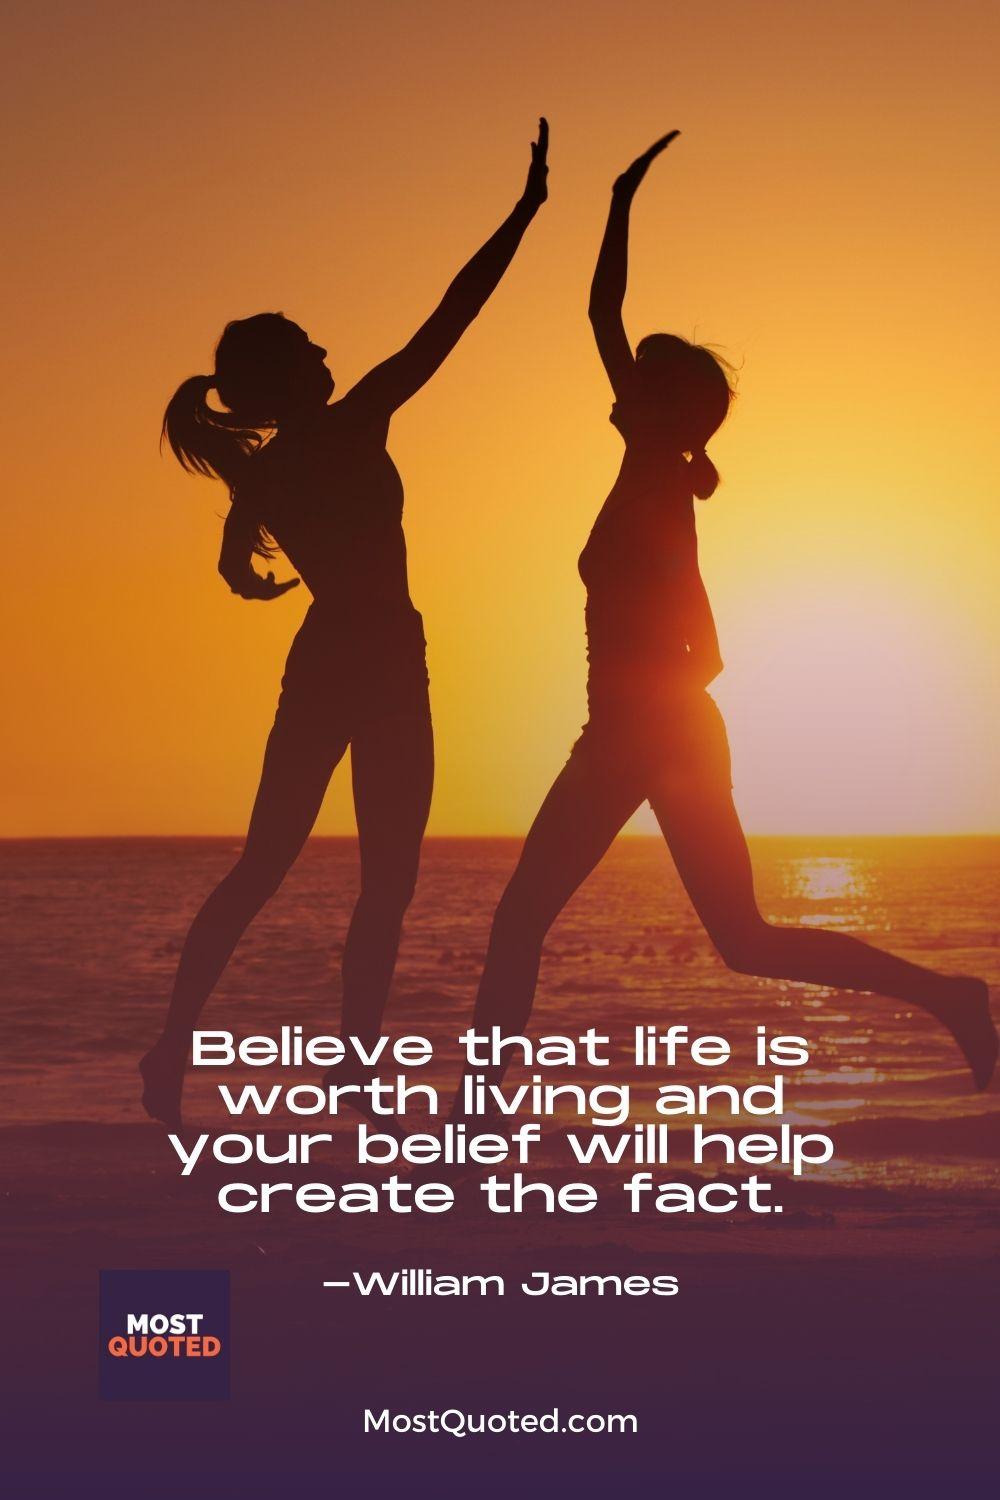 Believe that life is worth living and your belief will help create the fact. - William James